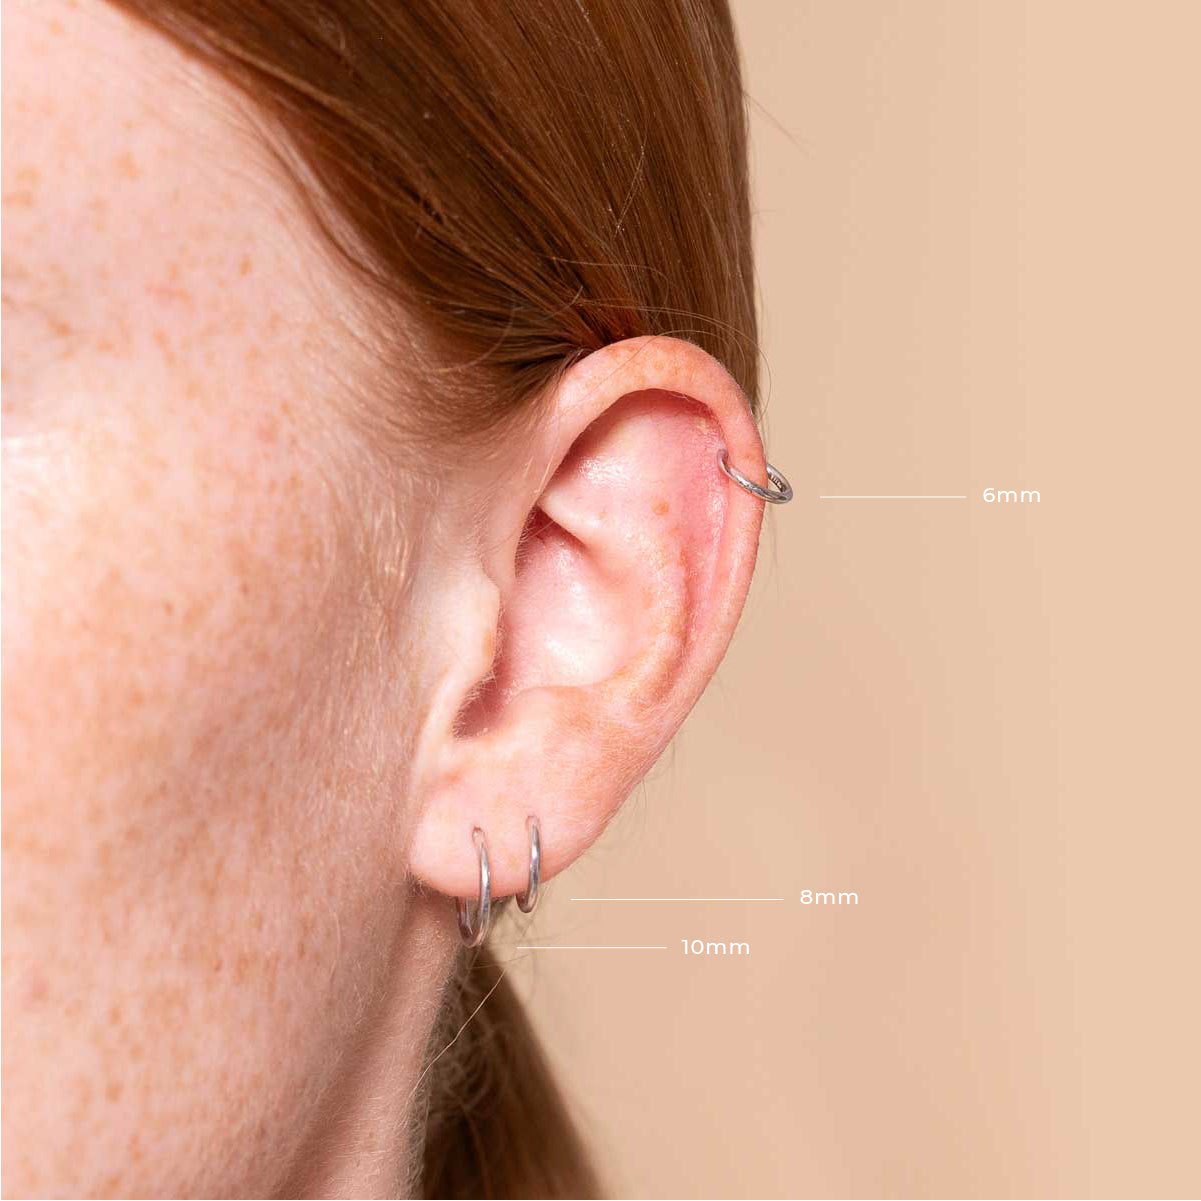 What are those gauge piercing earrings are called, where it only